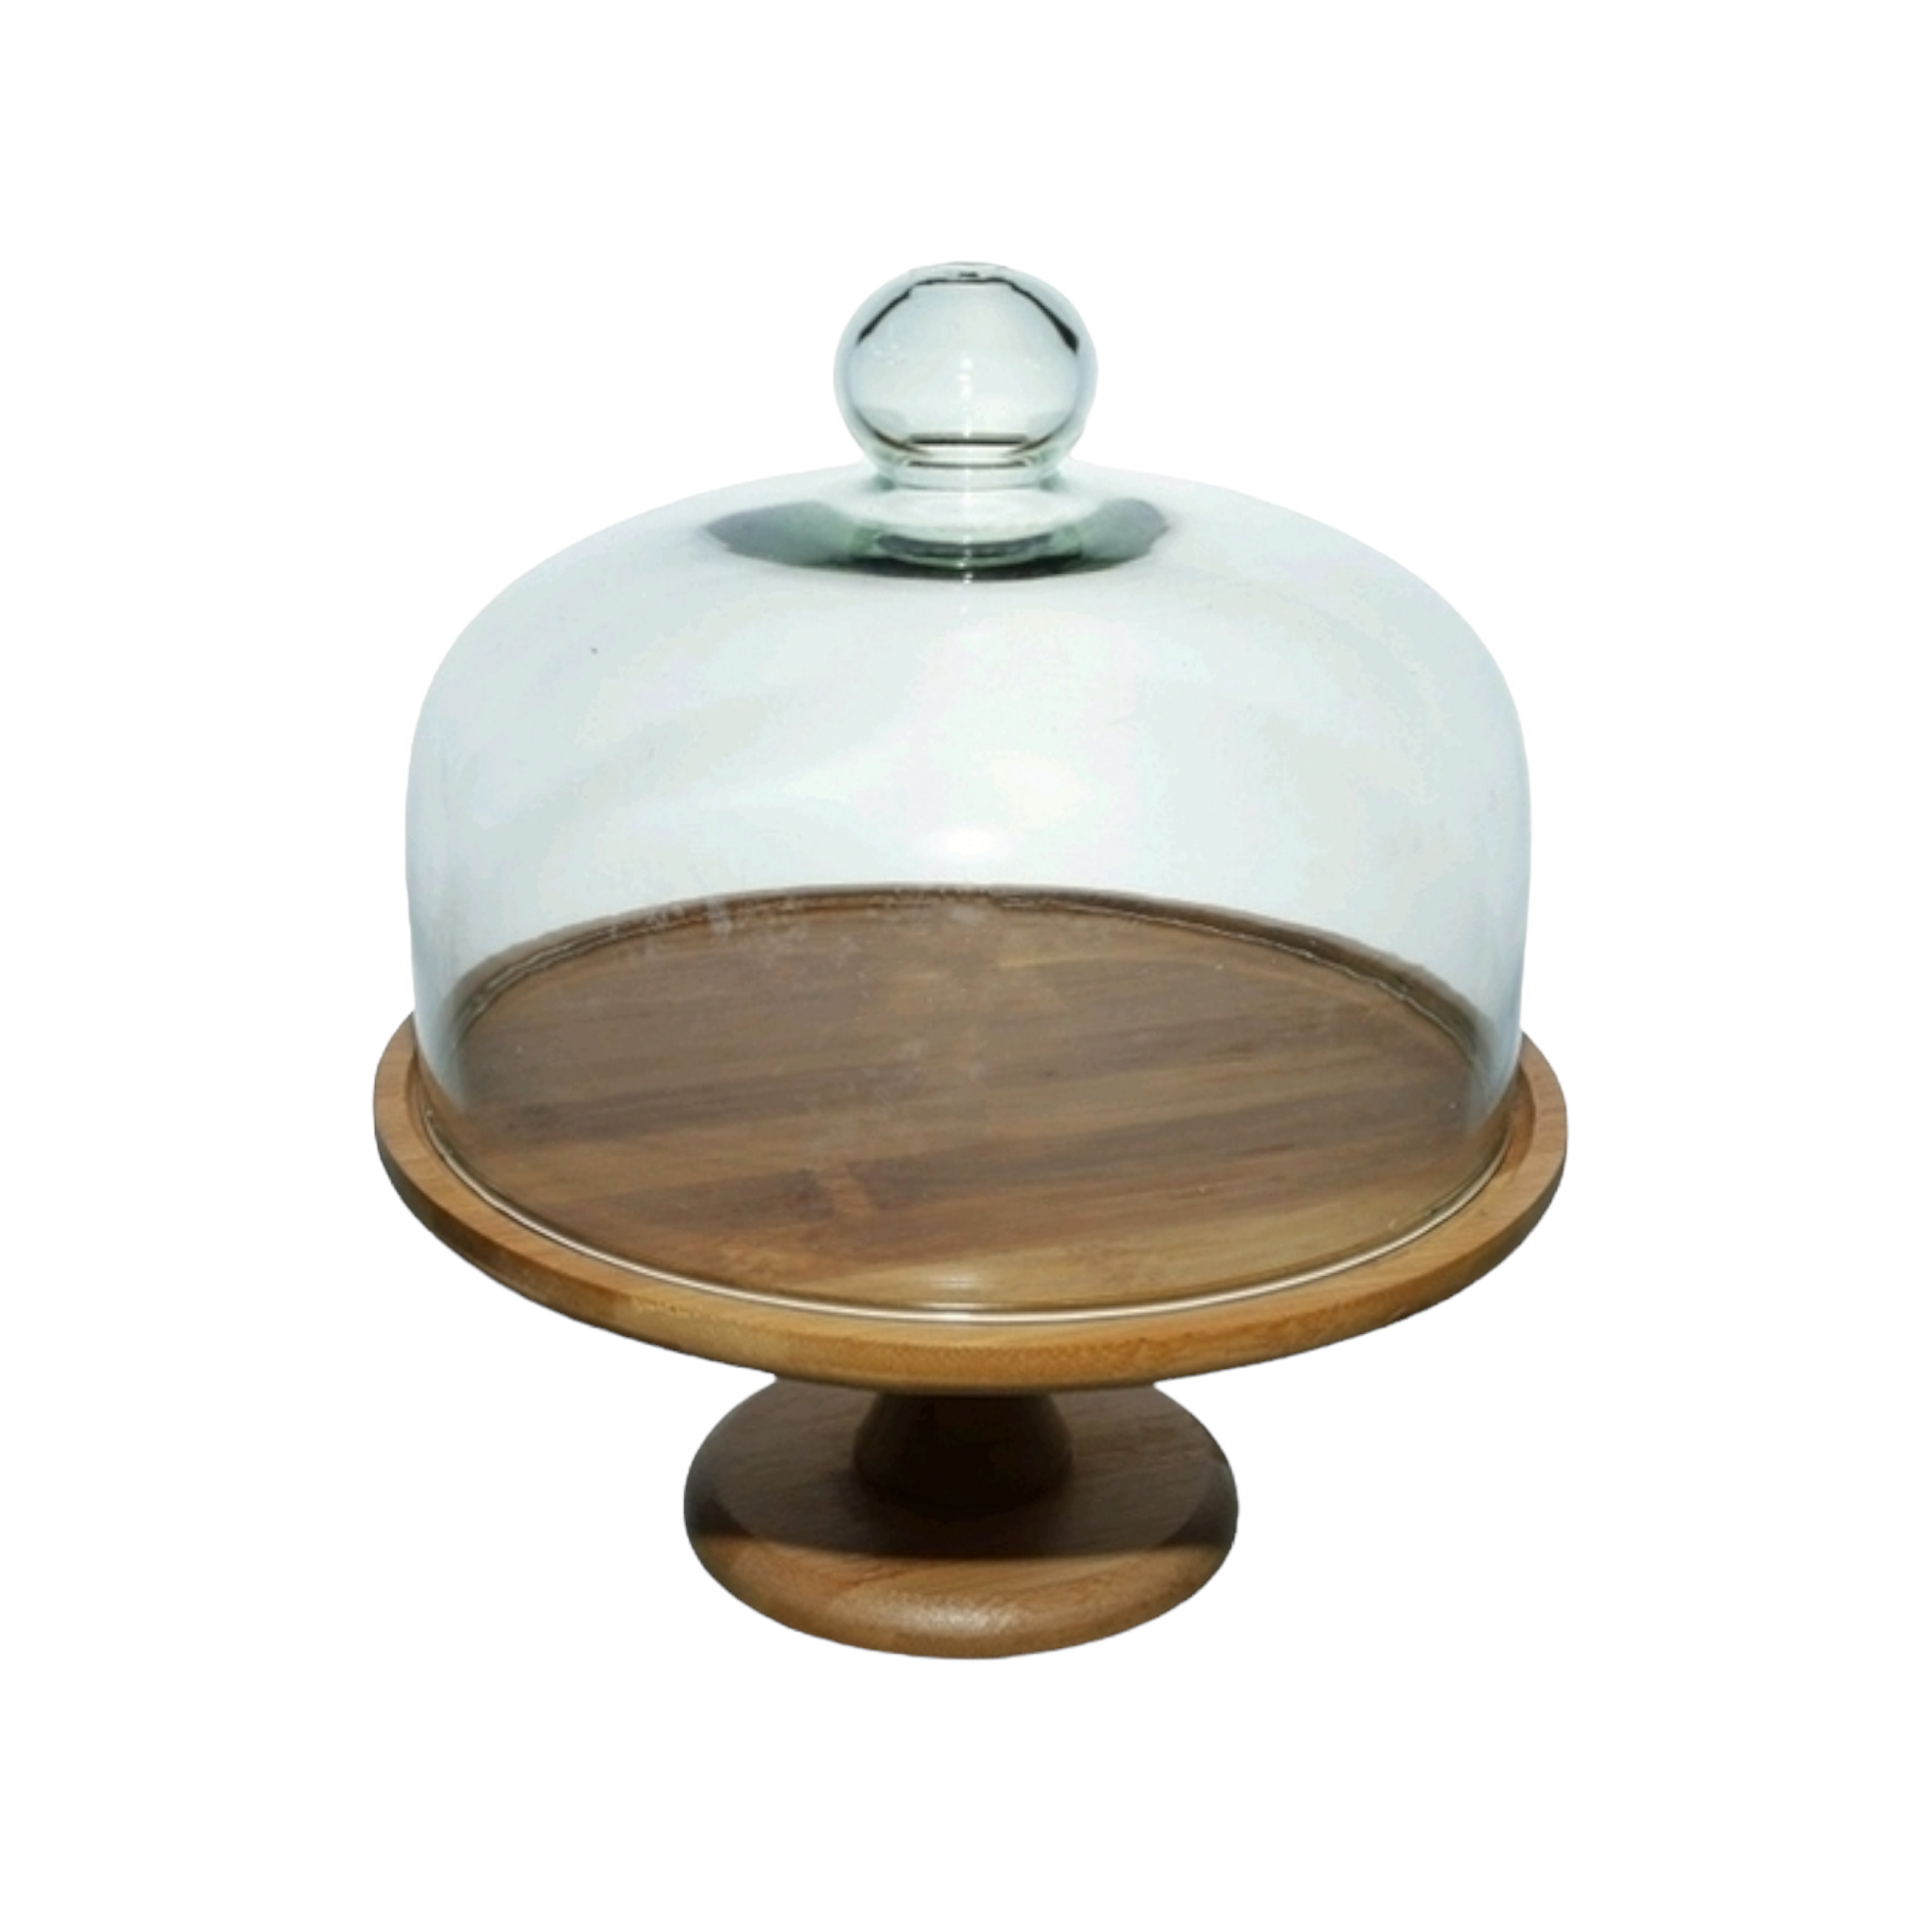 Patisserie Cake Dome Server 24cm with Acacia Wooden Base Footed Stand 34553